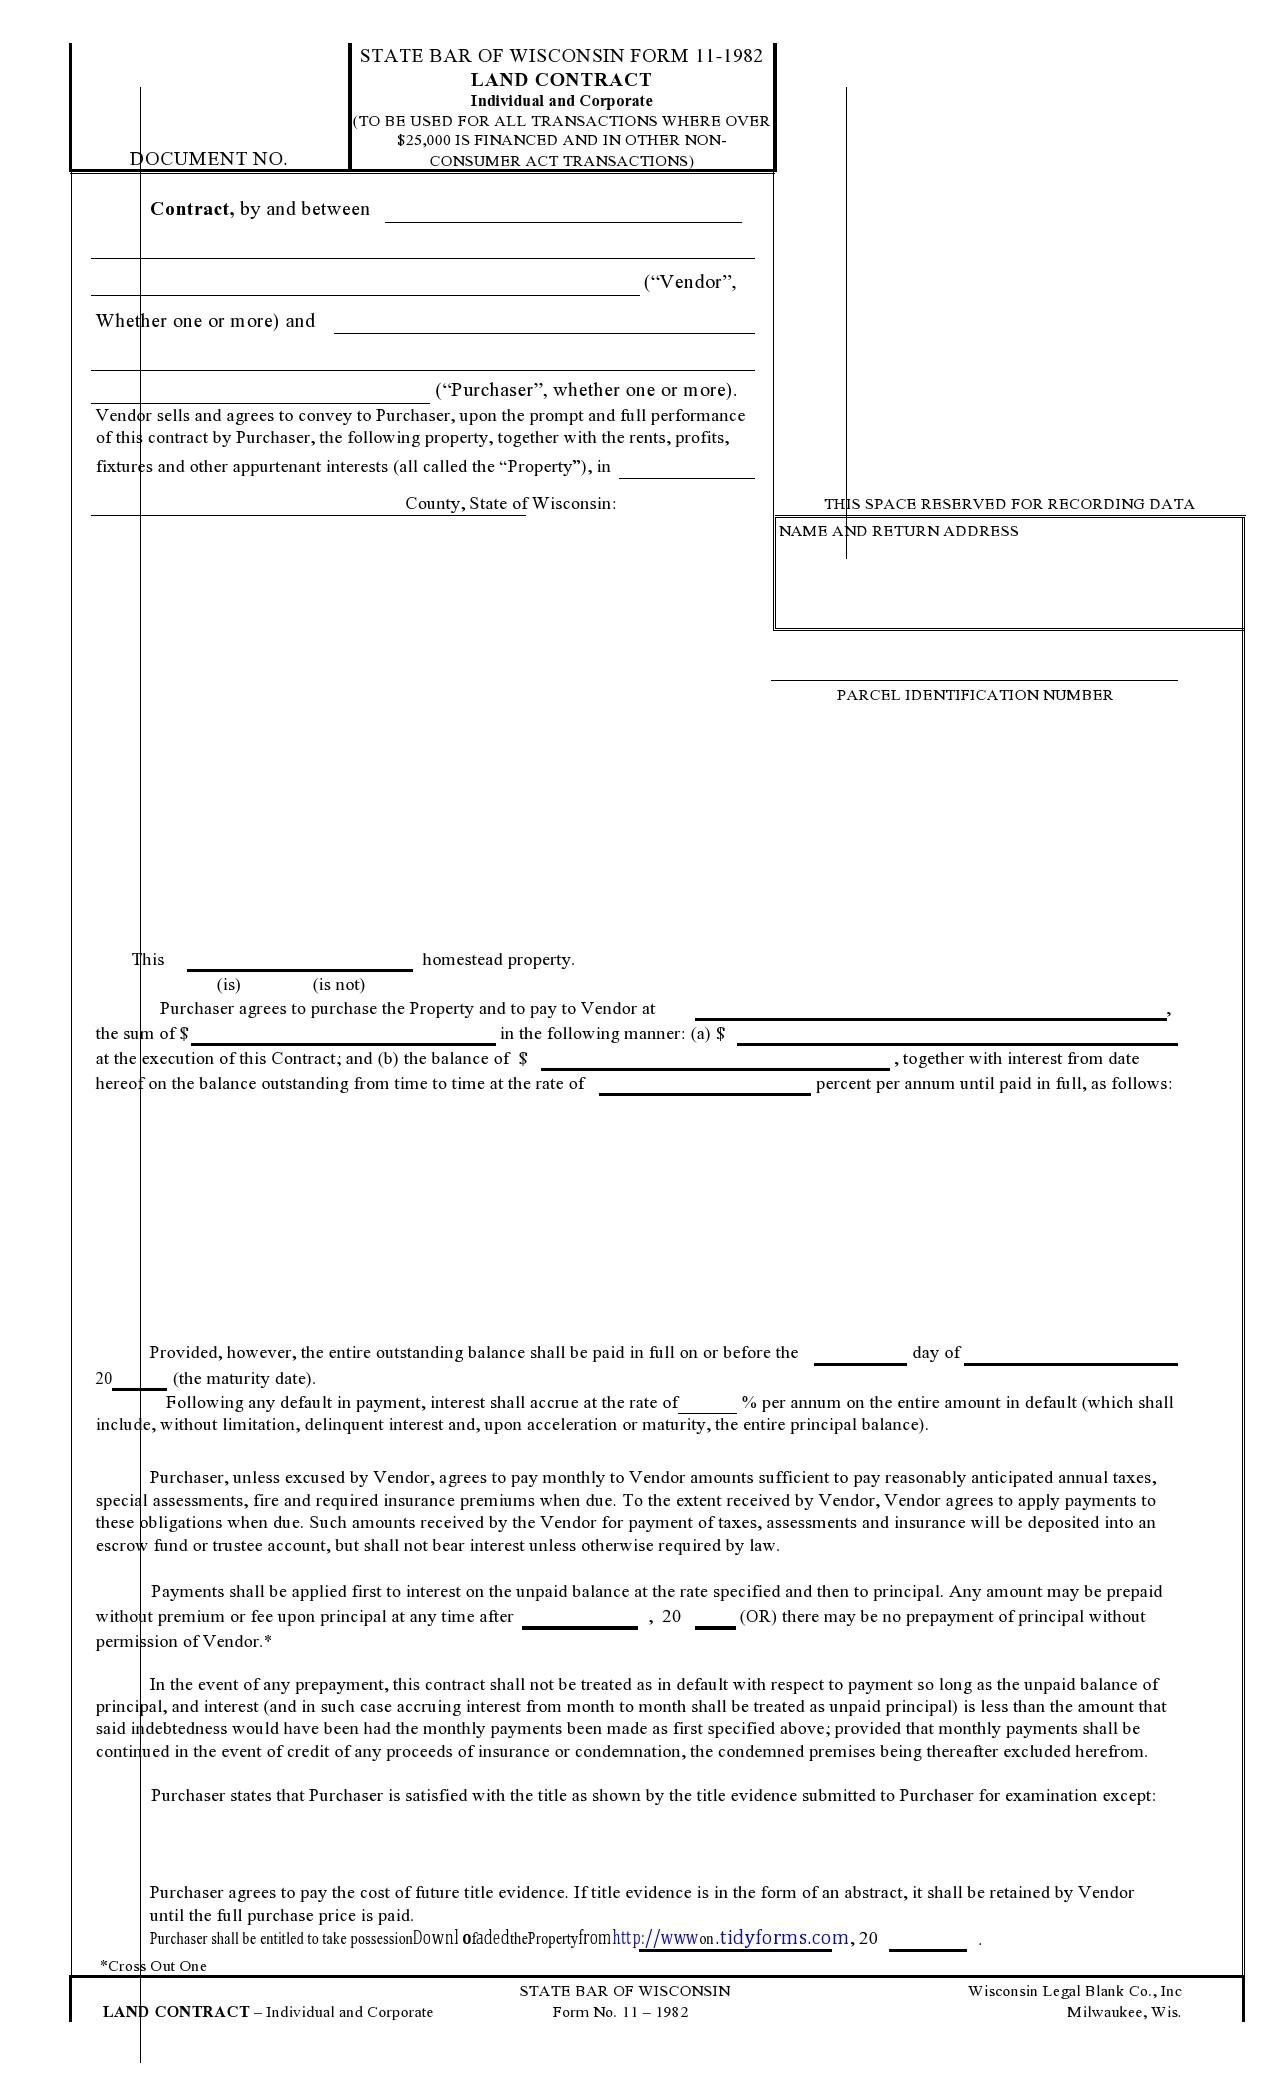 Free land contract form 02